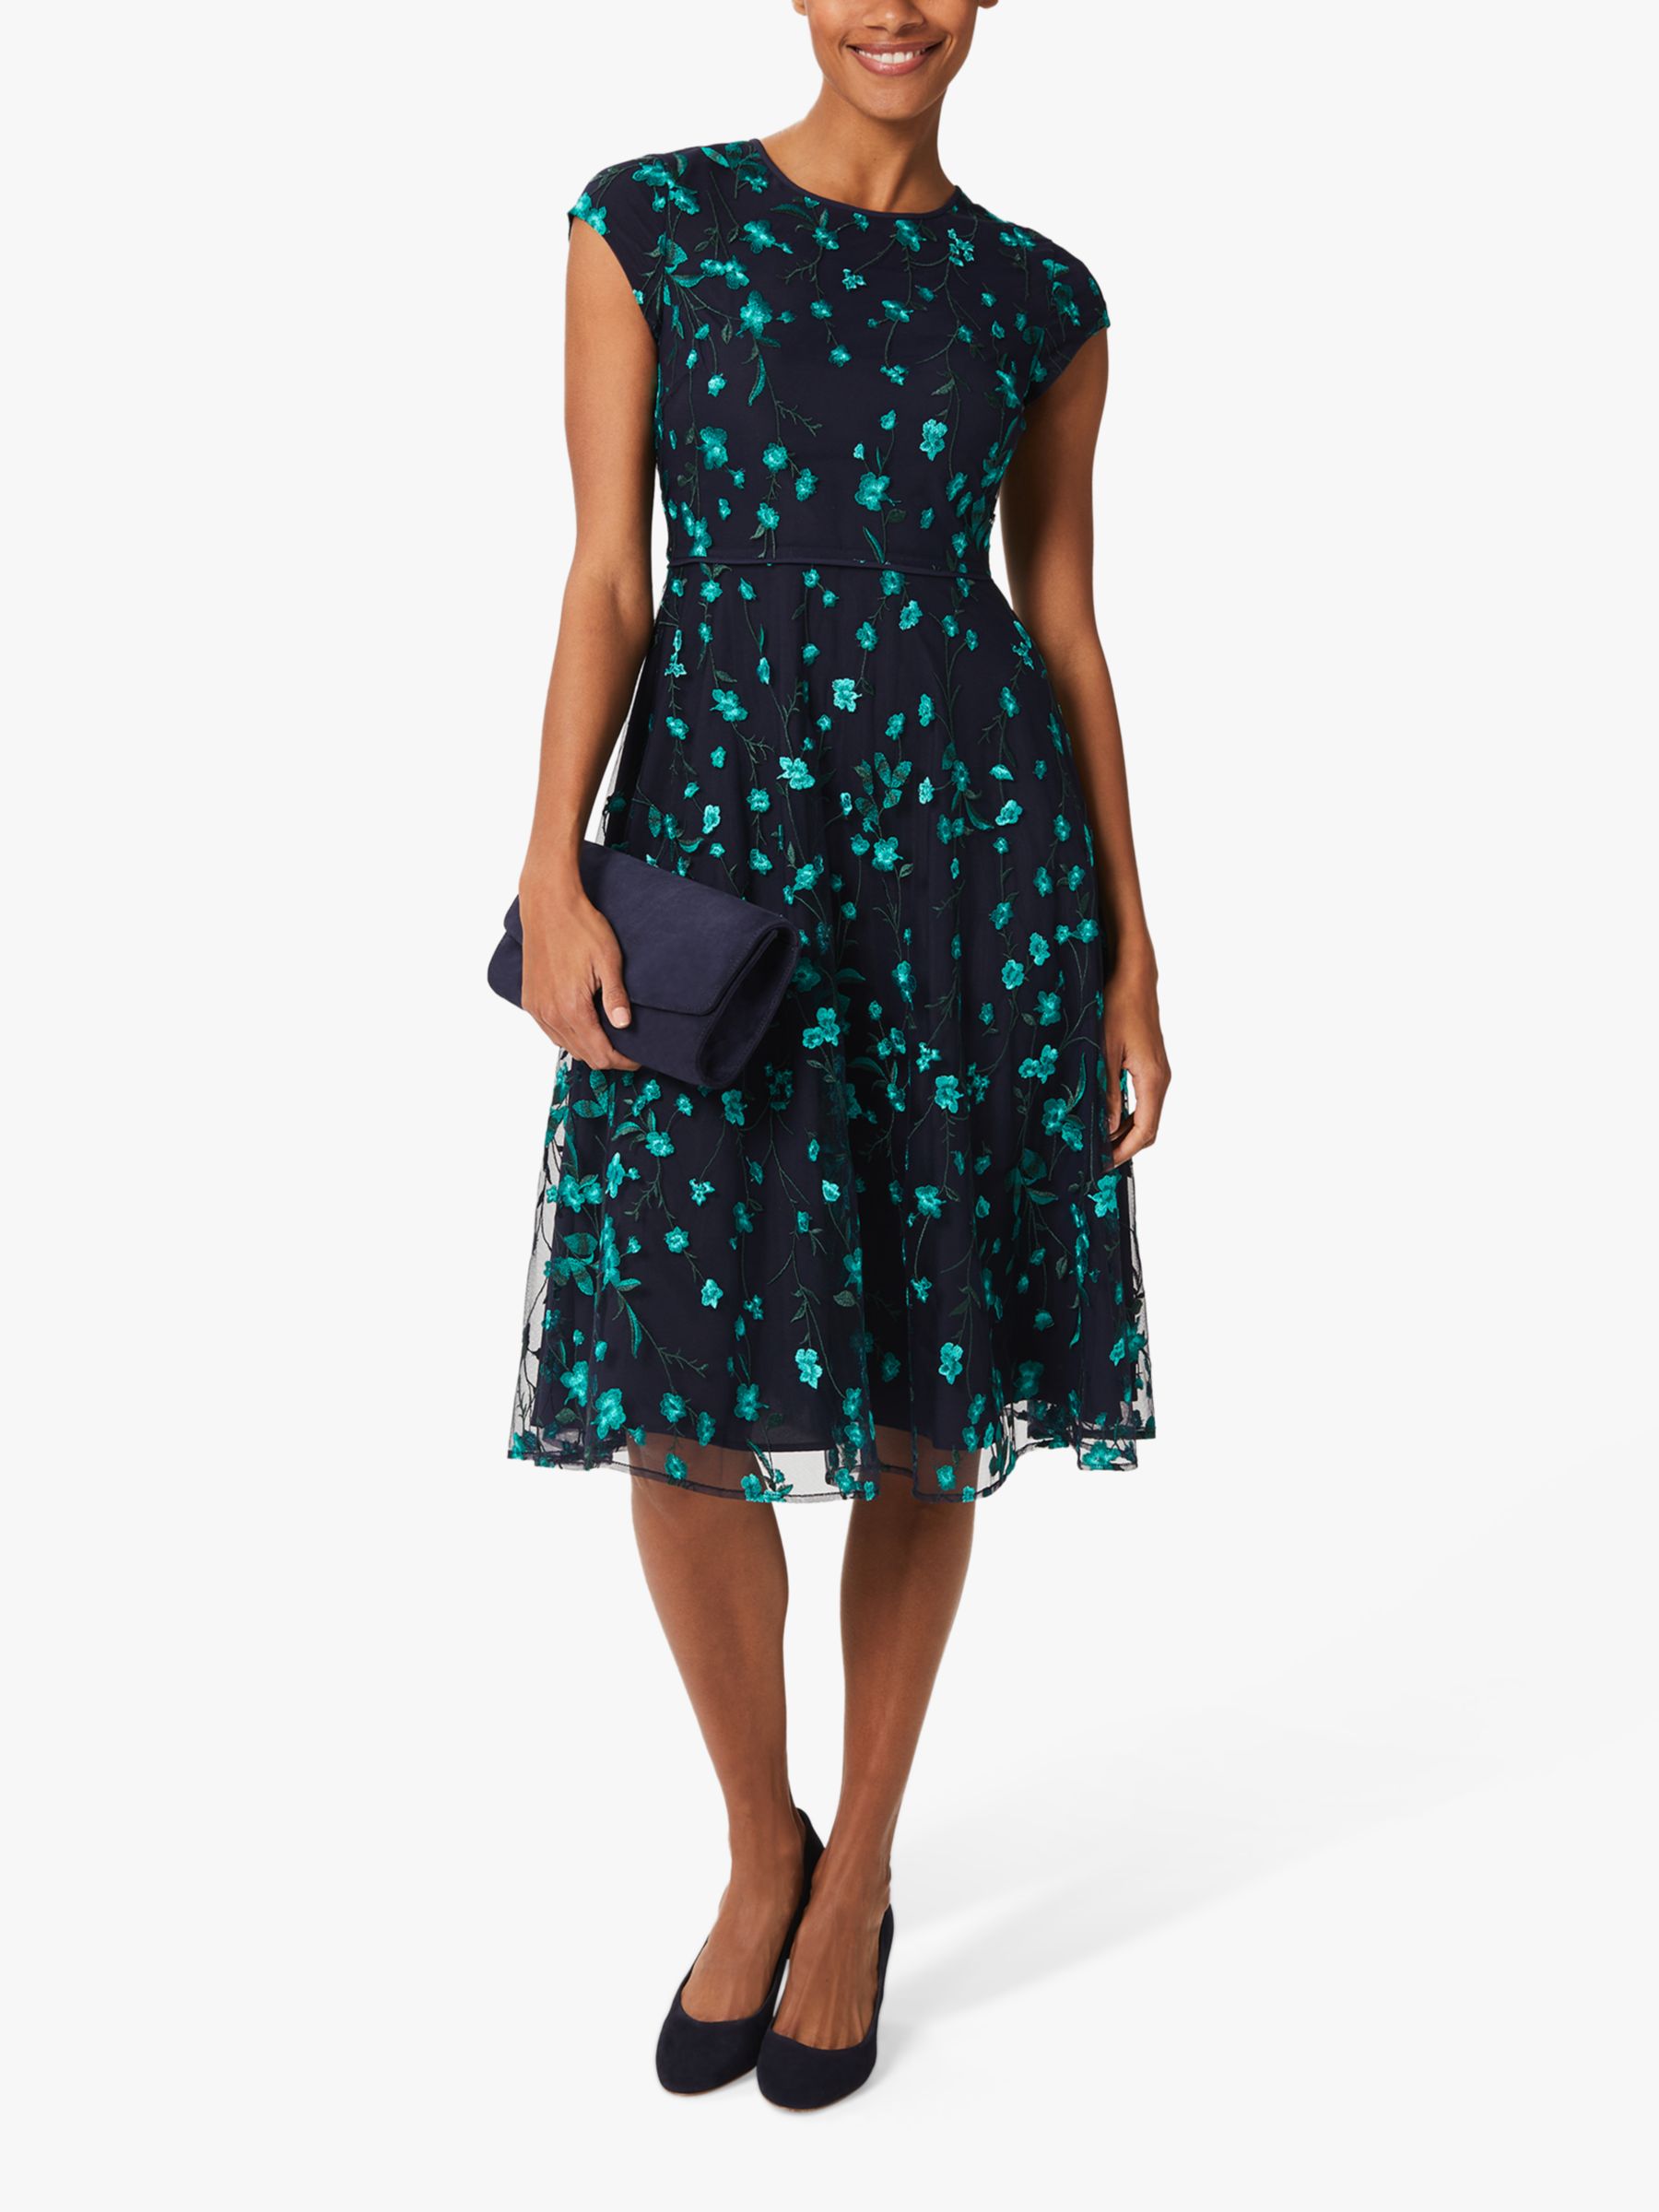 Hobbs Tia Floral Embroidered Dress, Navy/Multi at John Lewis & Partners